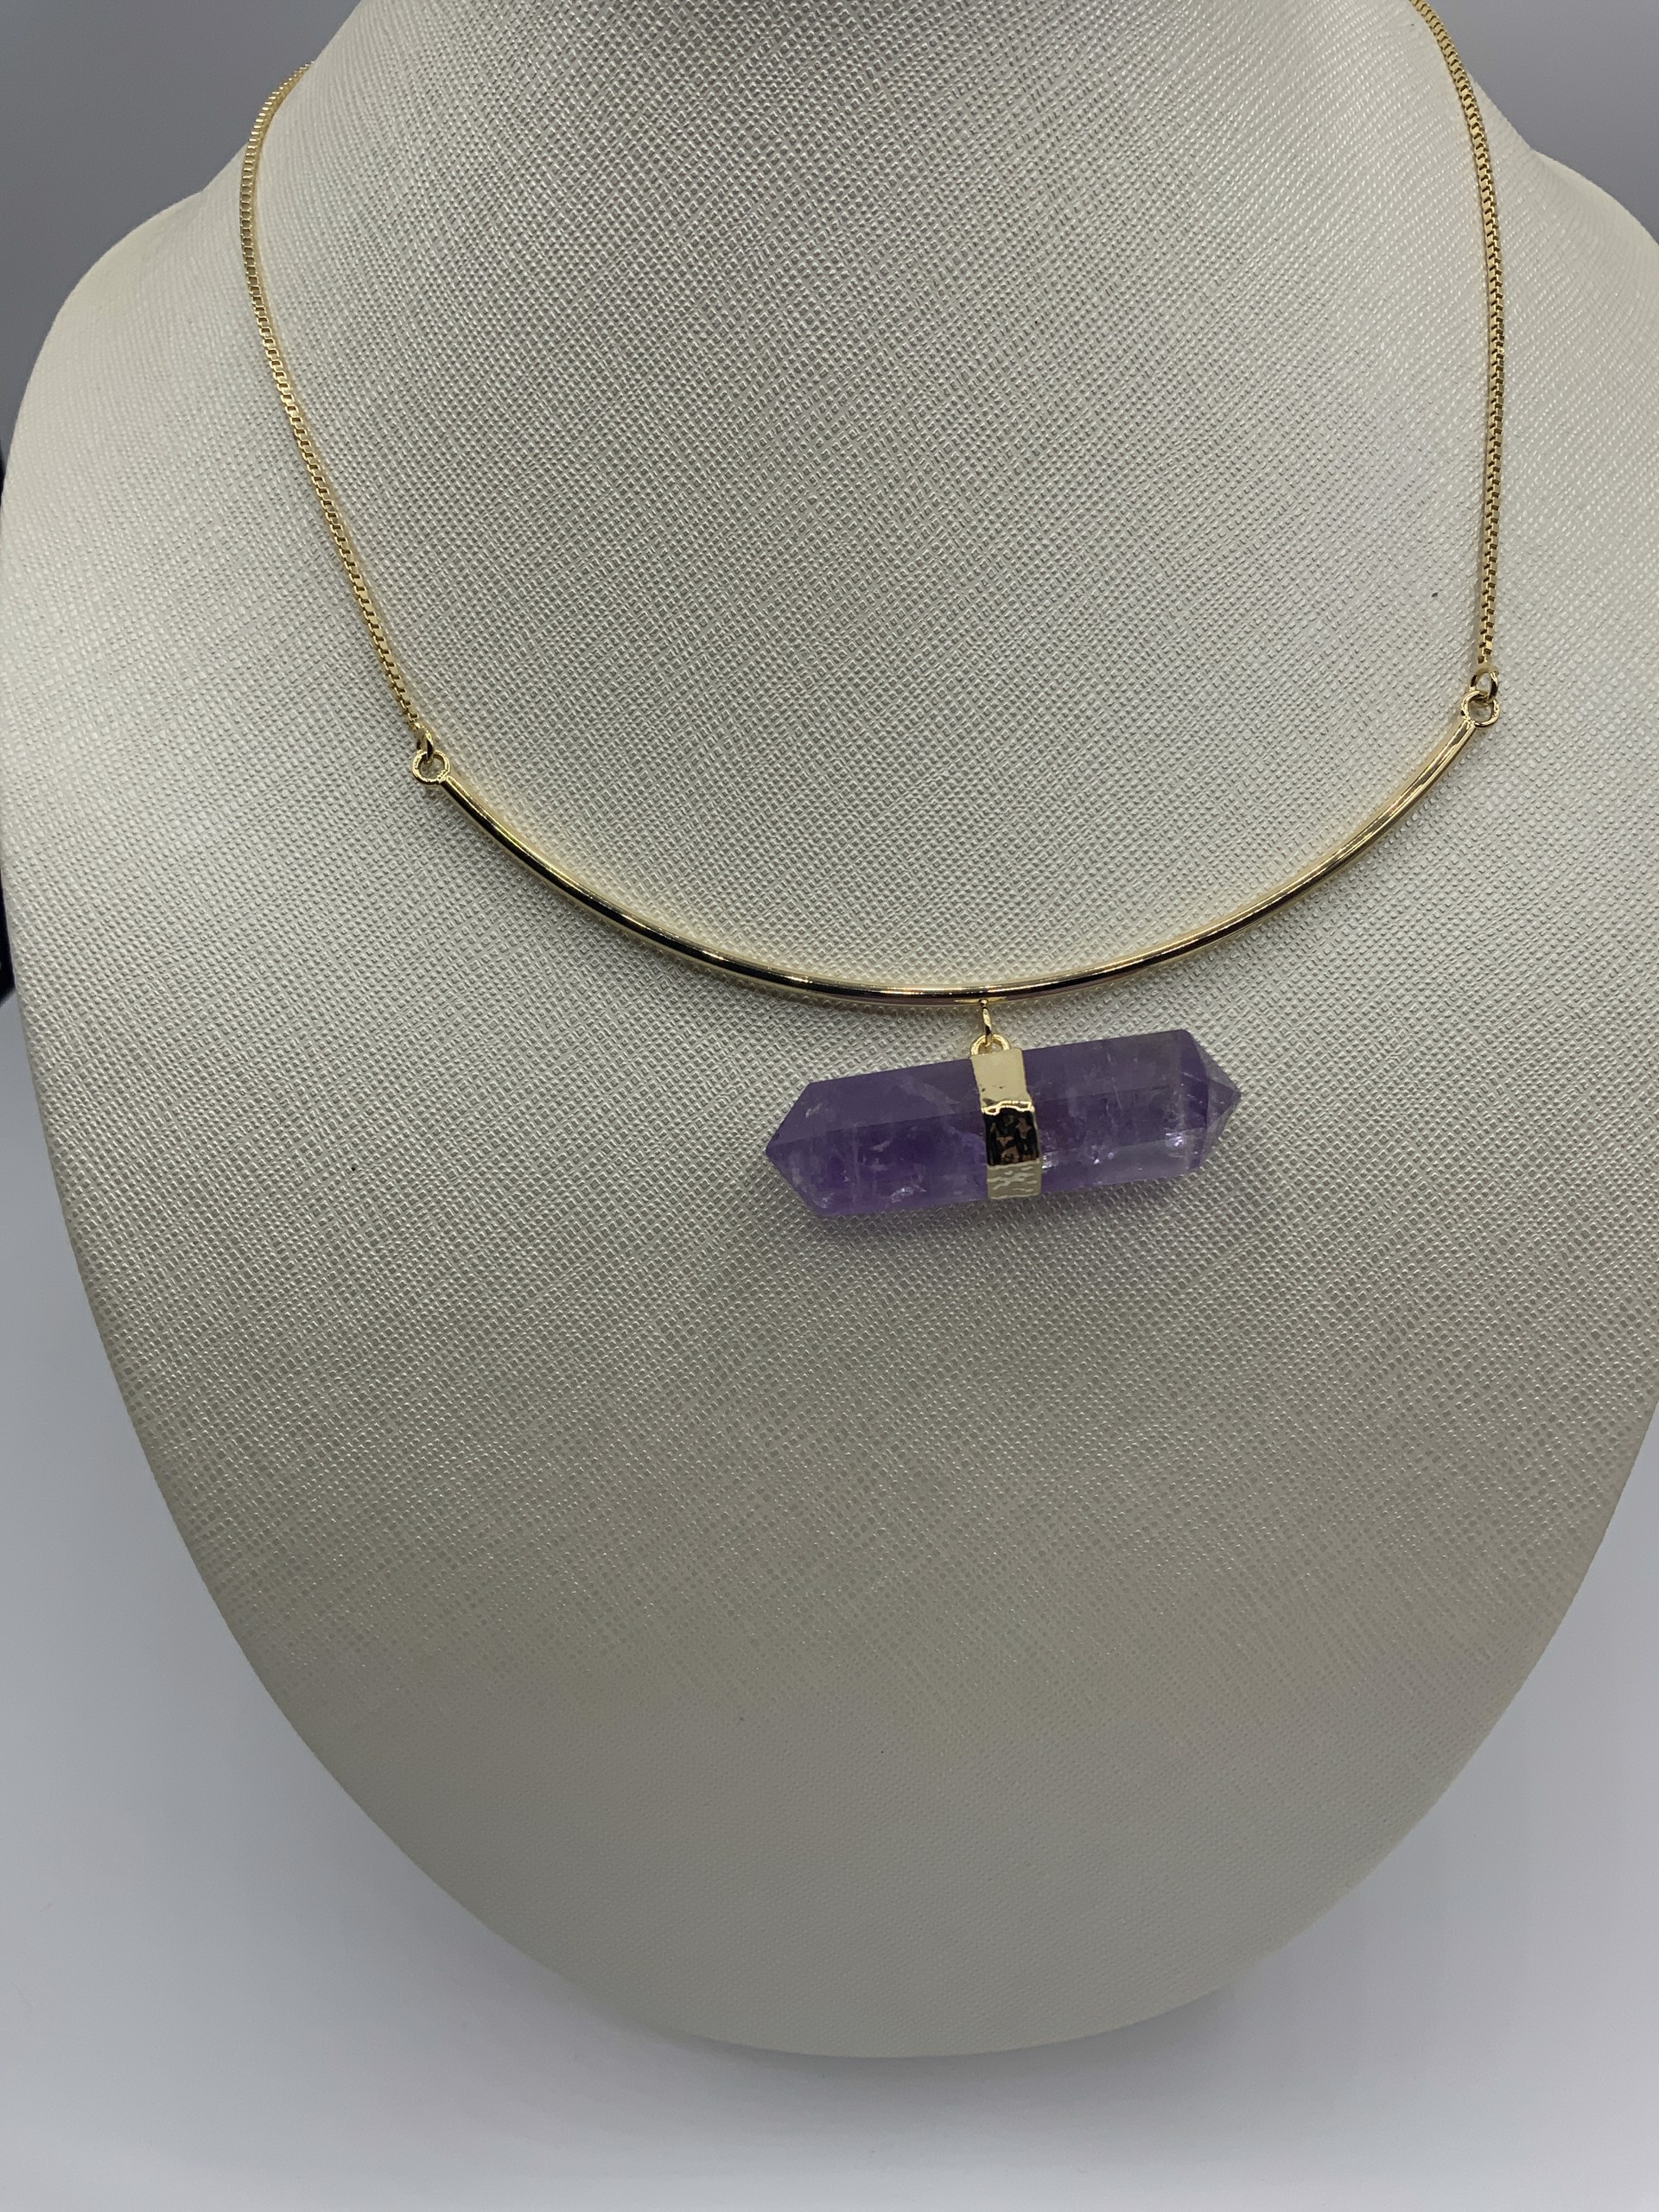 Single double sided point on curved bar-Amethyst by M&Co.